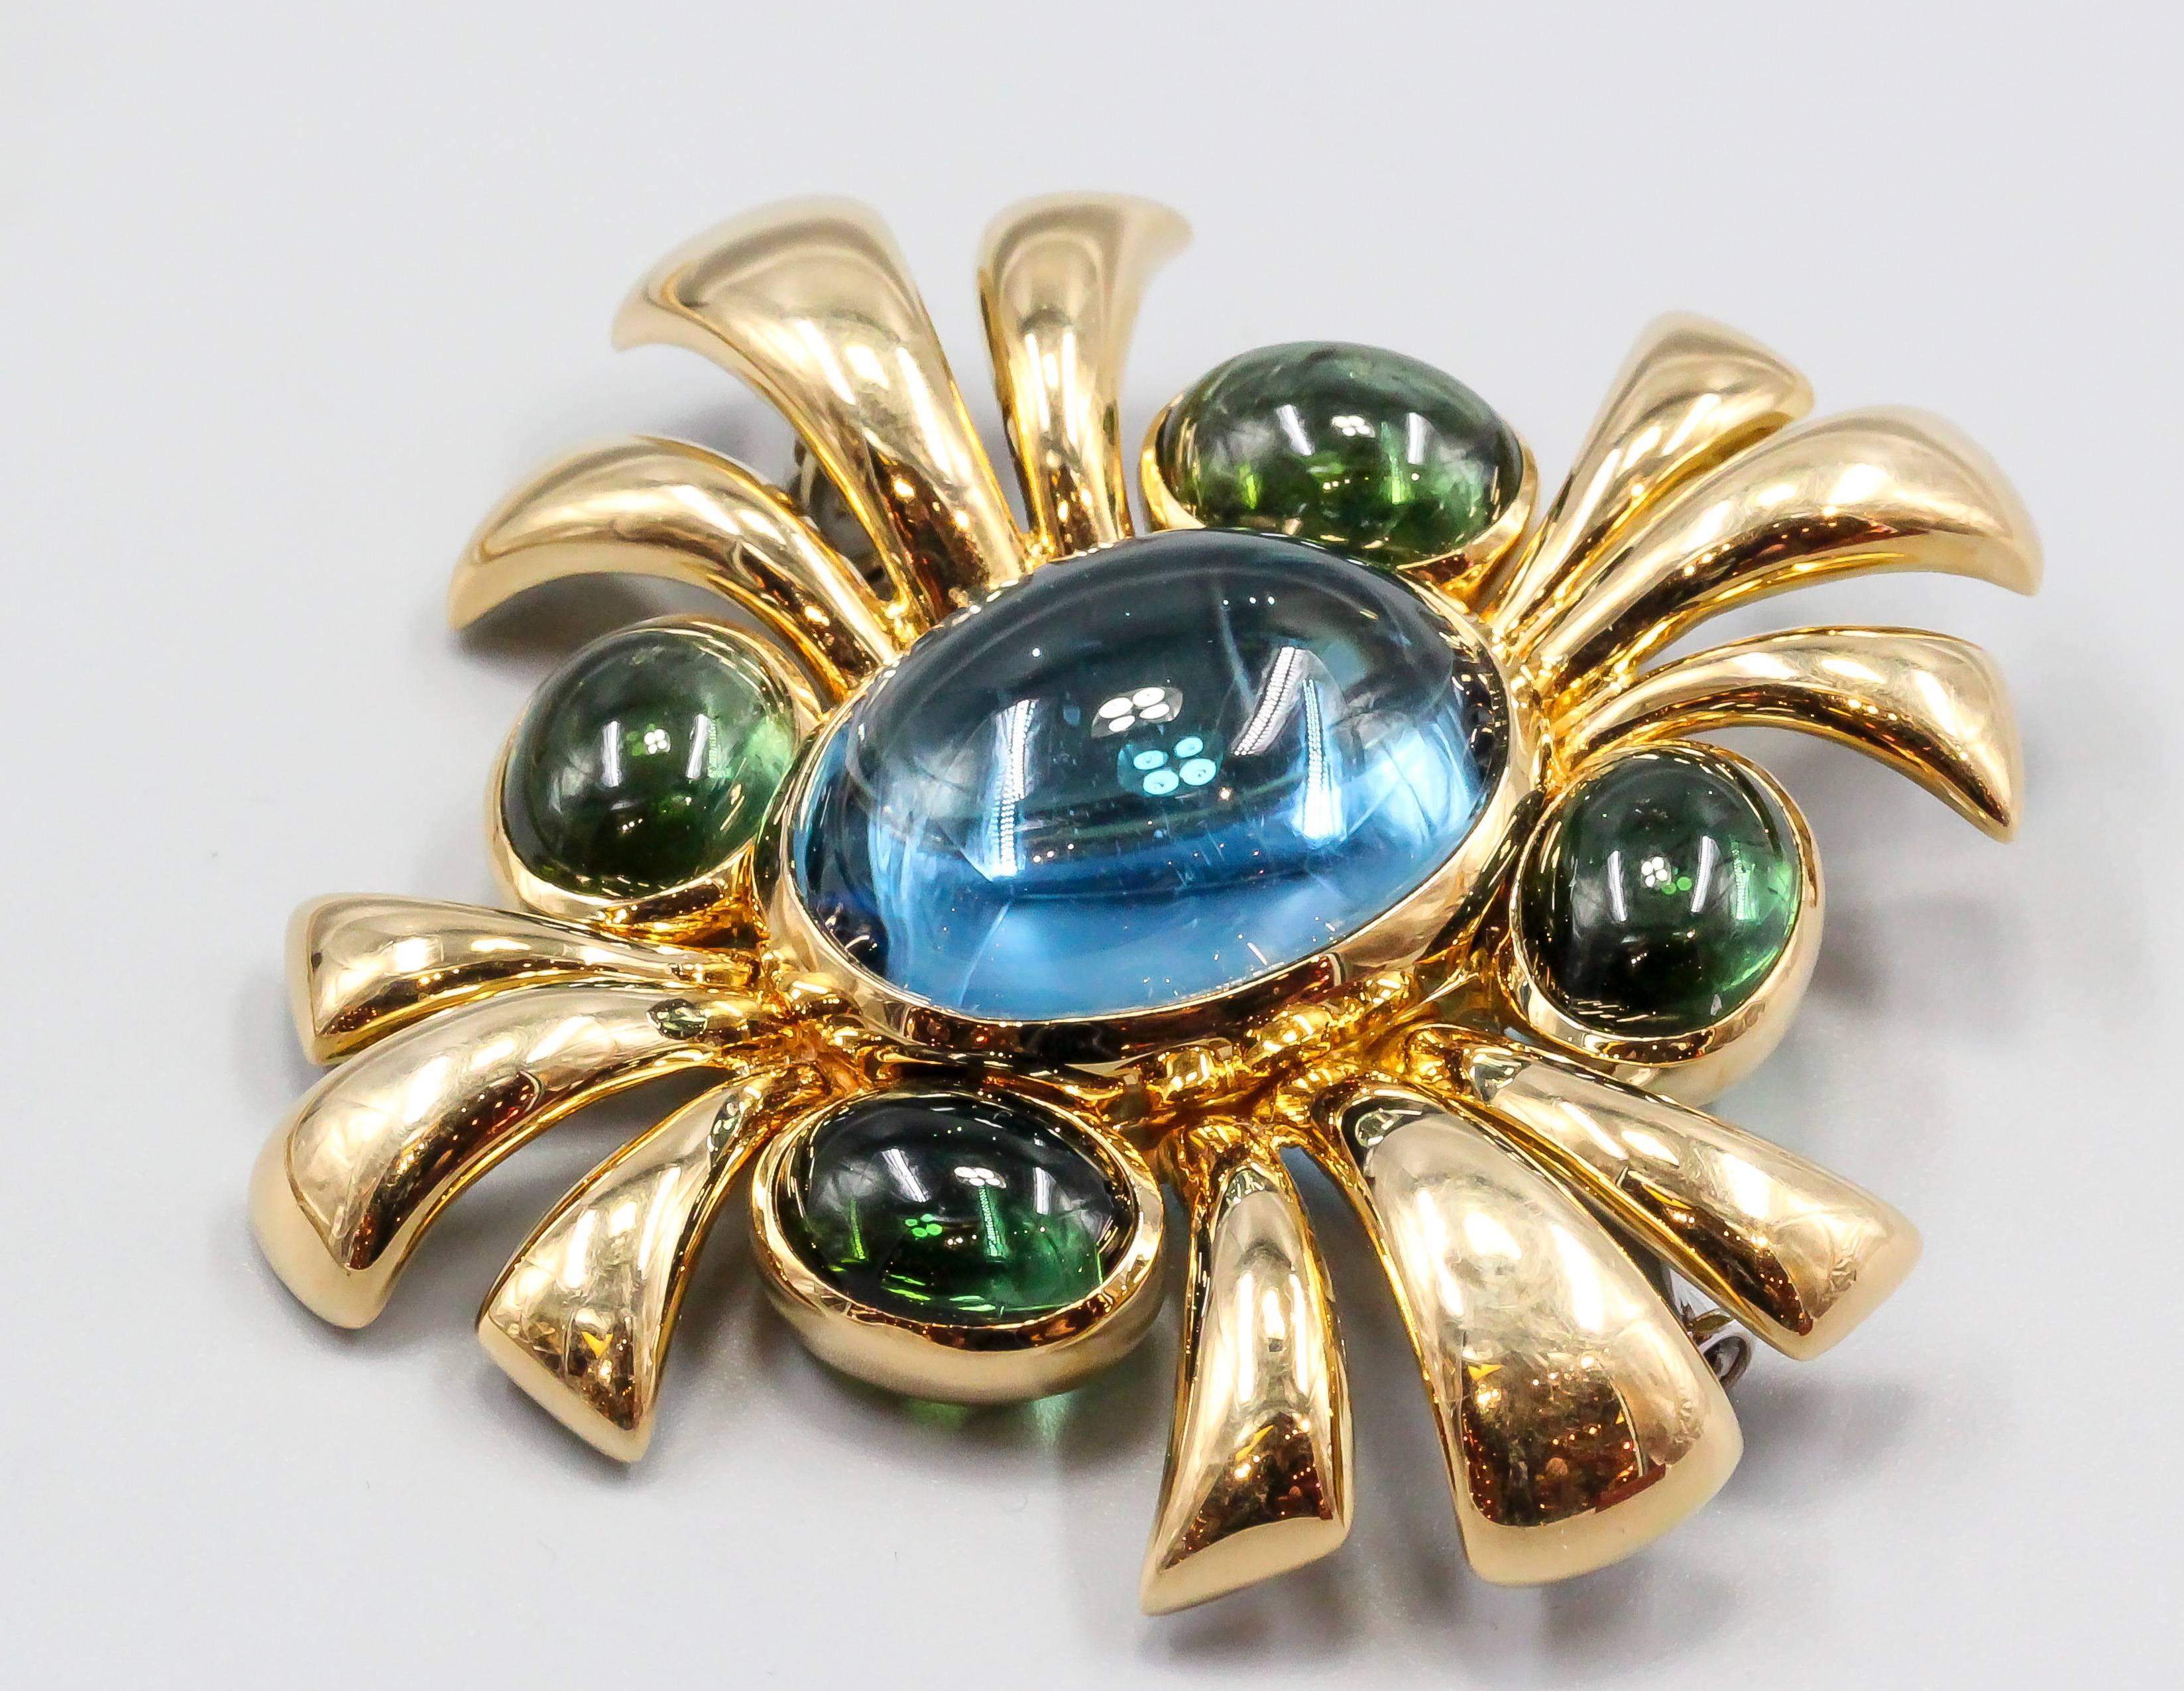 Chic and refined blue topaz, green tourmaline and 18K yellow gold brooch from the 